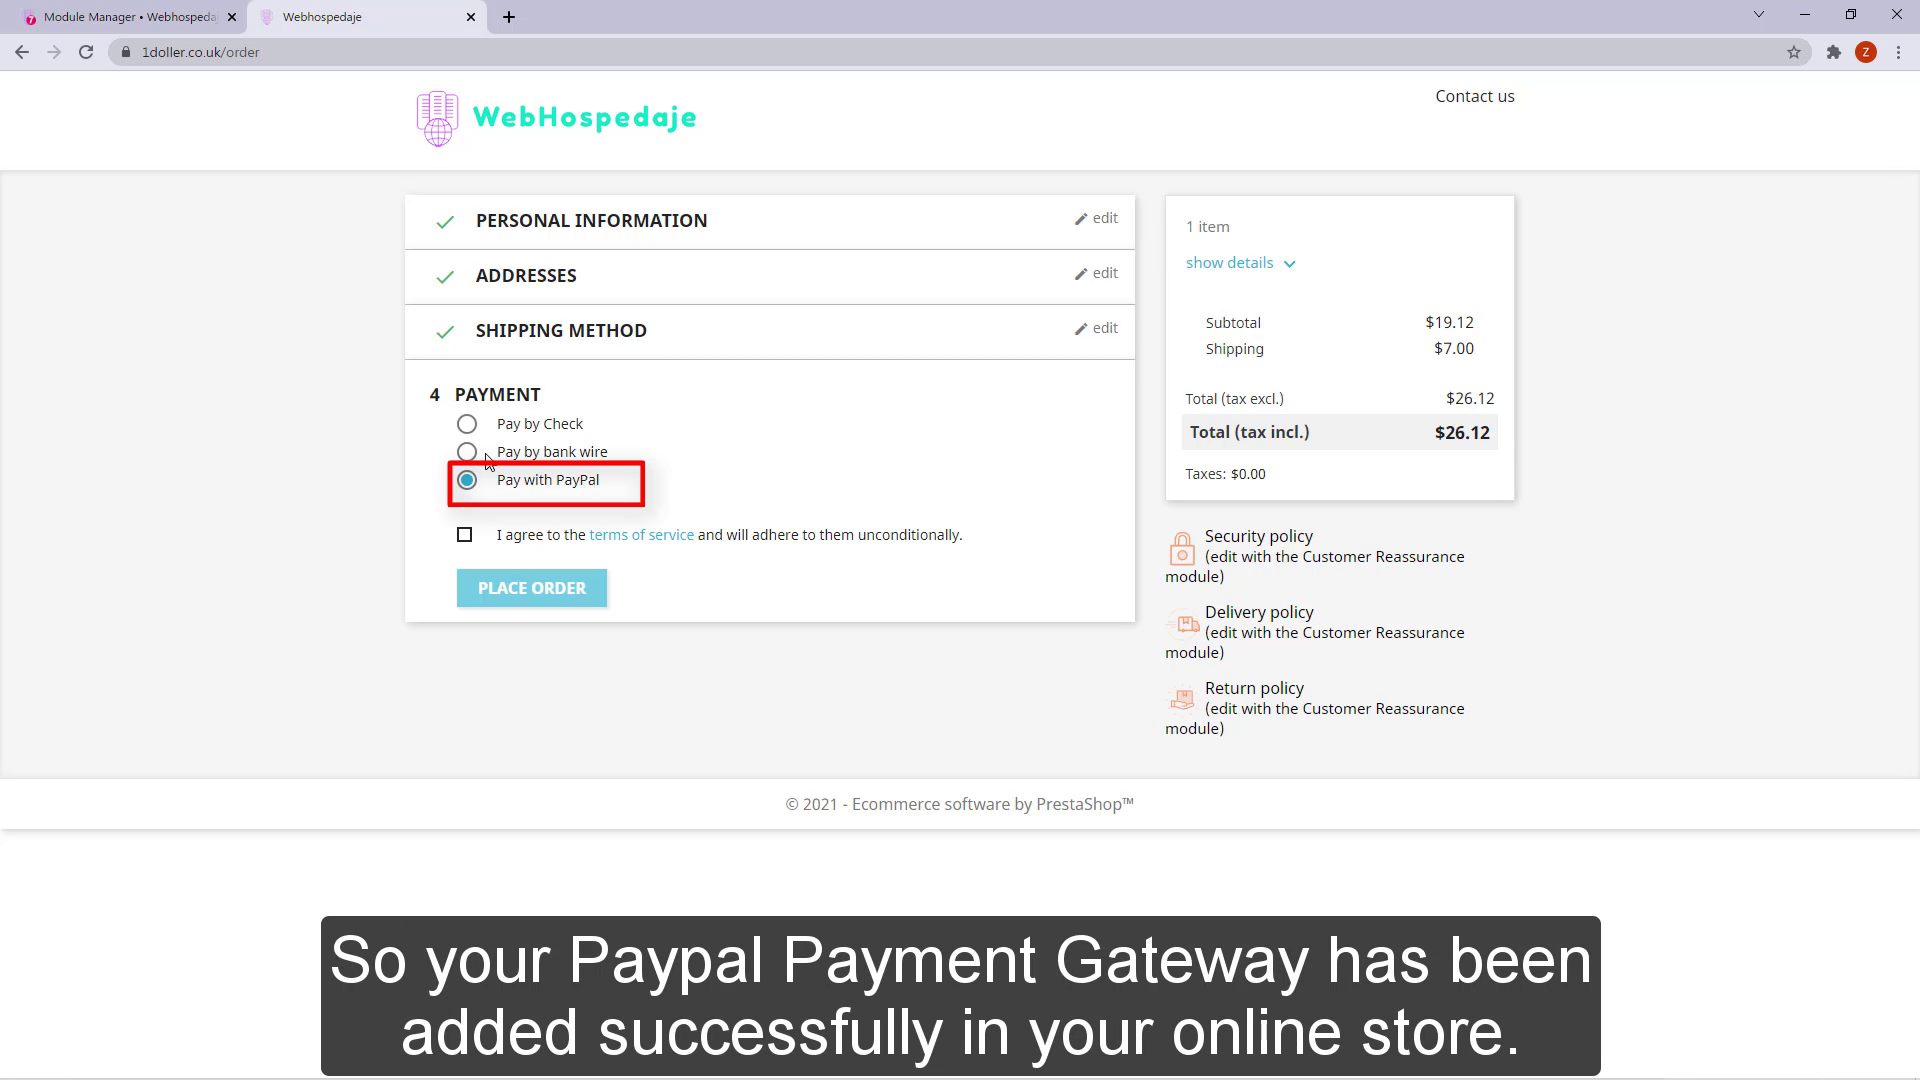 So your Paypal Payment Gateway has been added successfully in your online store